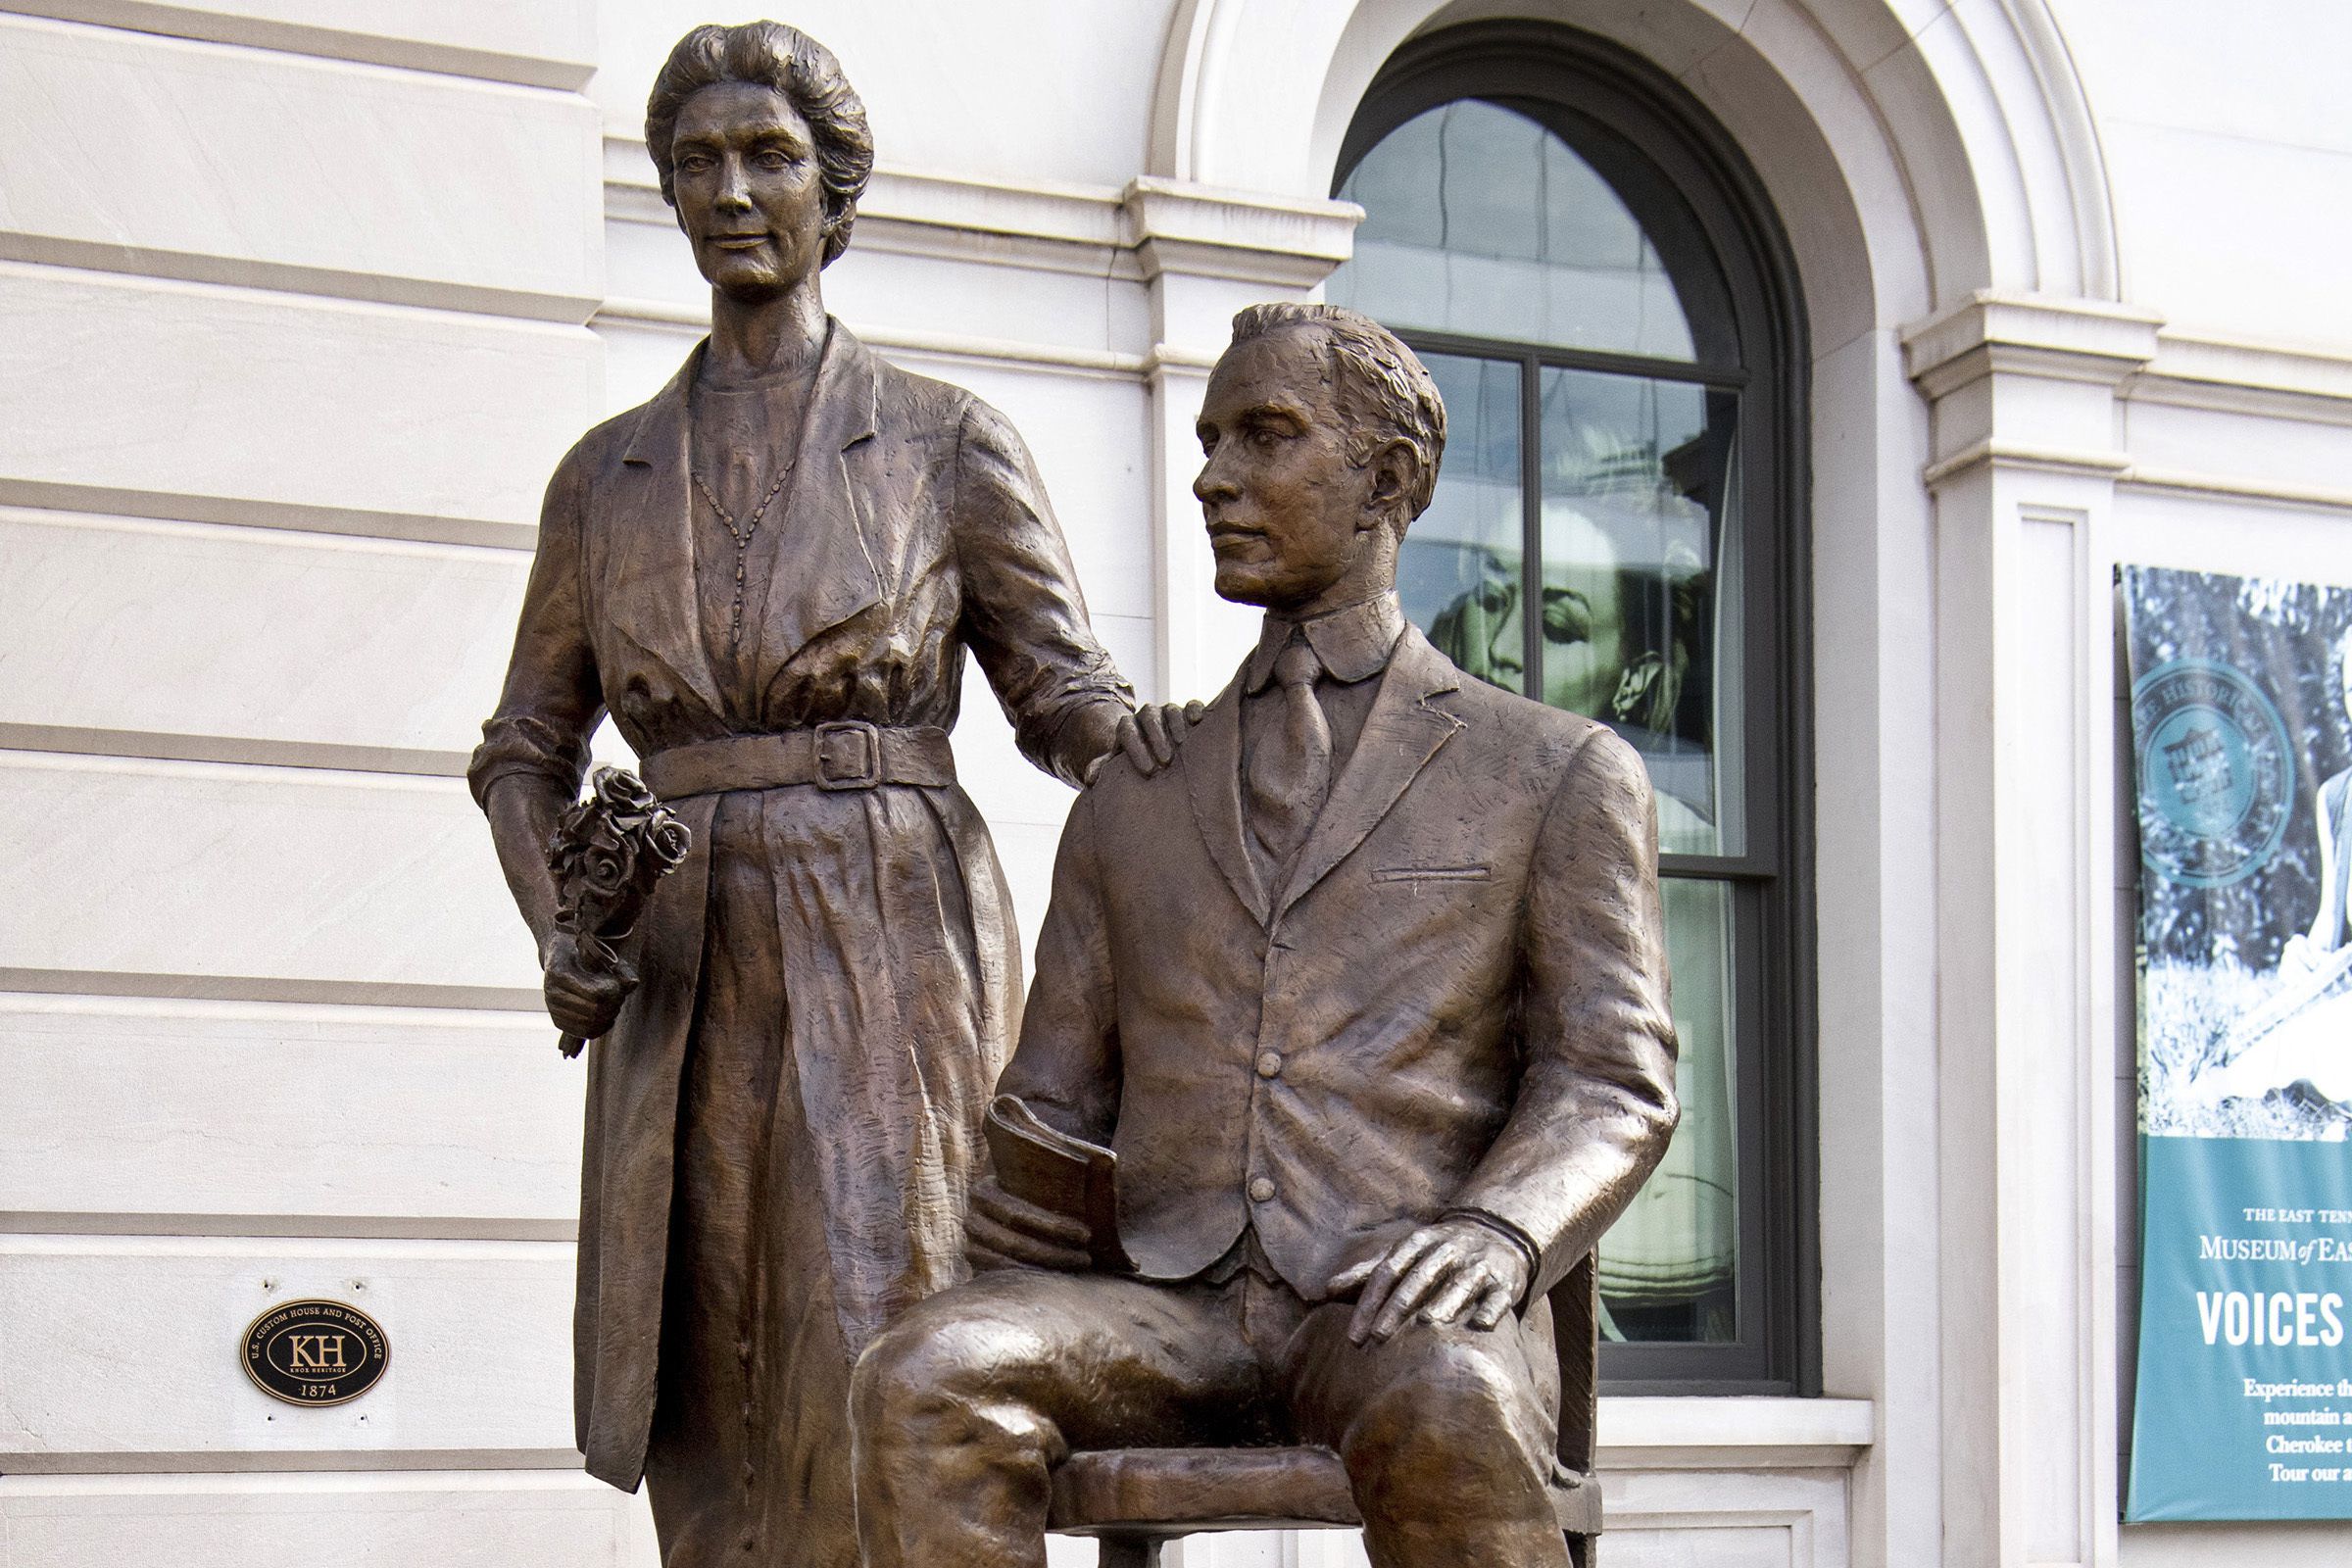 Congress and nonprofit working to put women's suffrage monument on